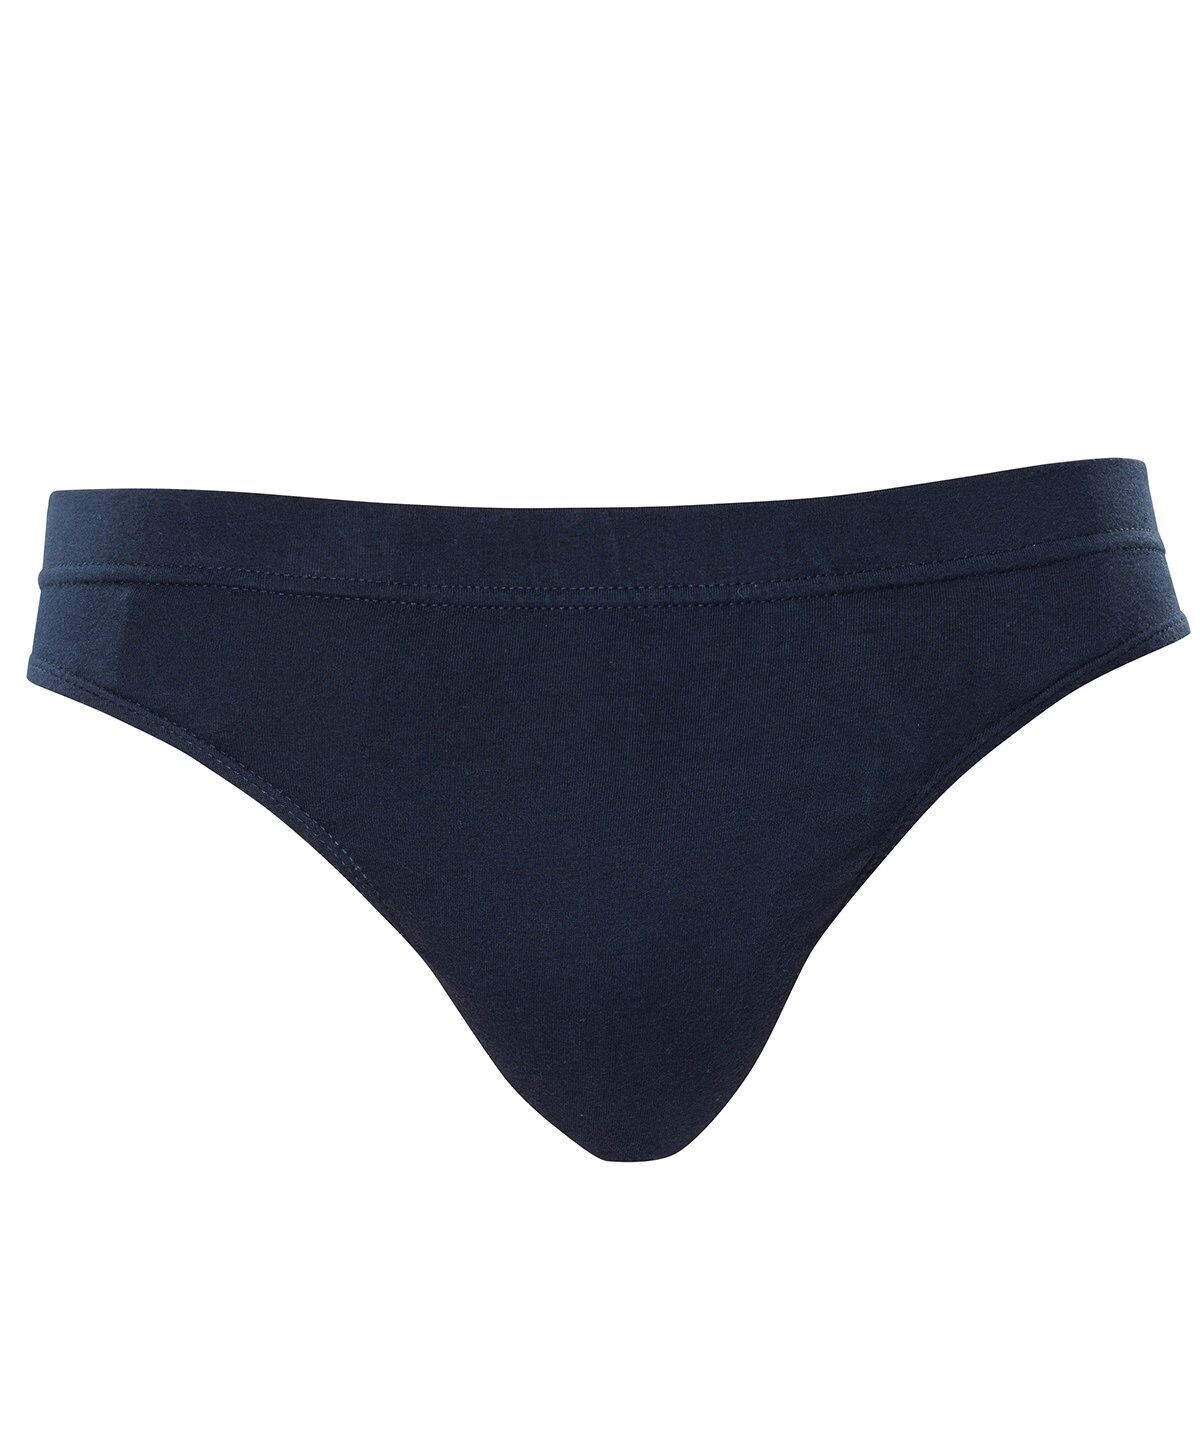 Asquith & Fox Men's Slip Briefs (3 pairs in a pack), Sizes & Colours Available: Navy L (36"- 38")